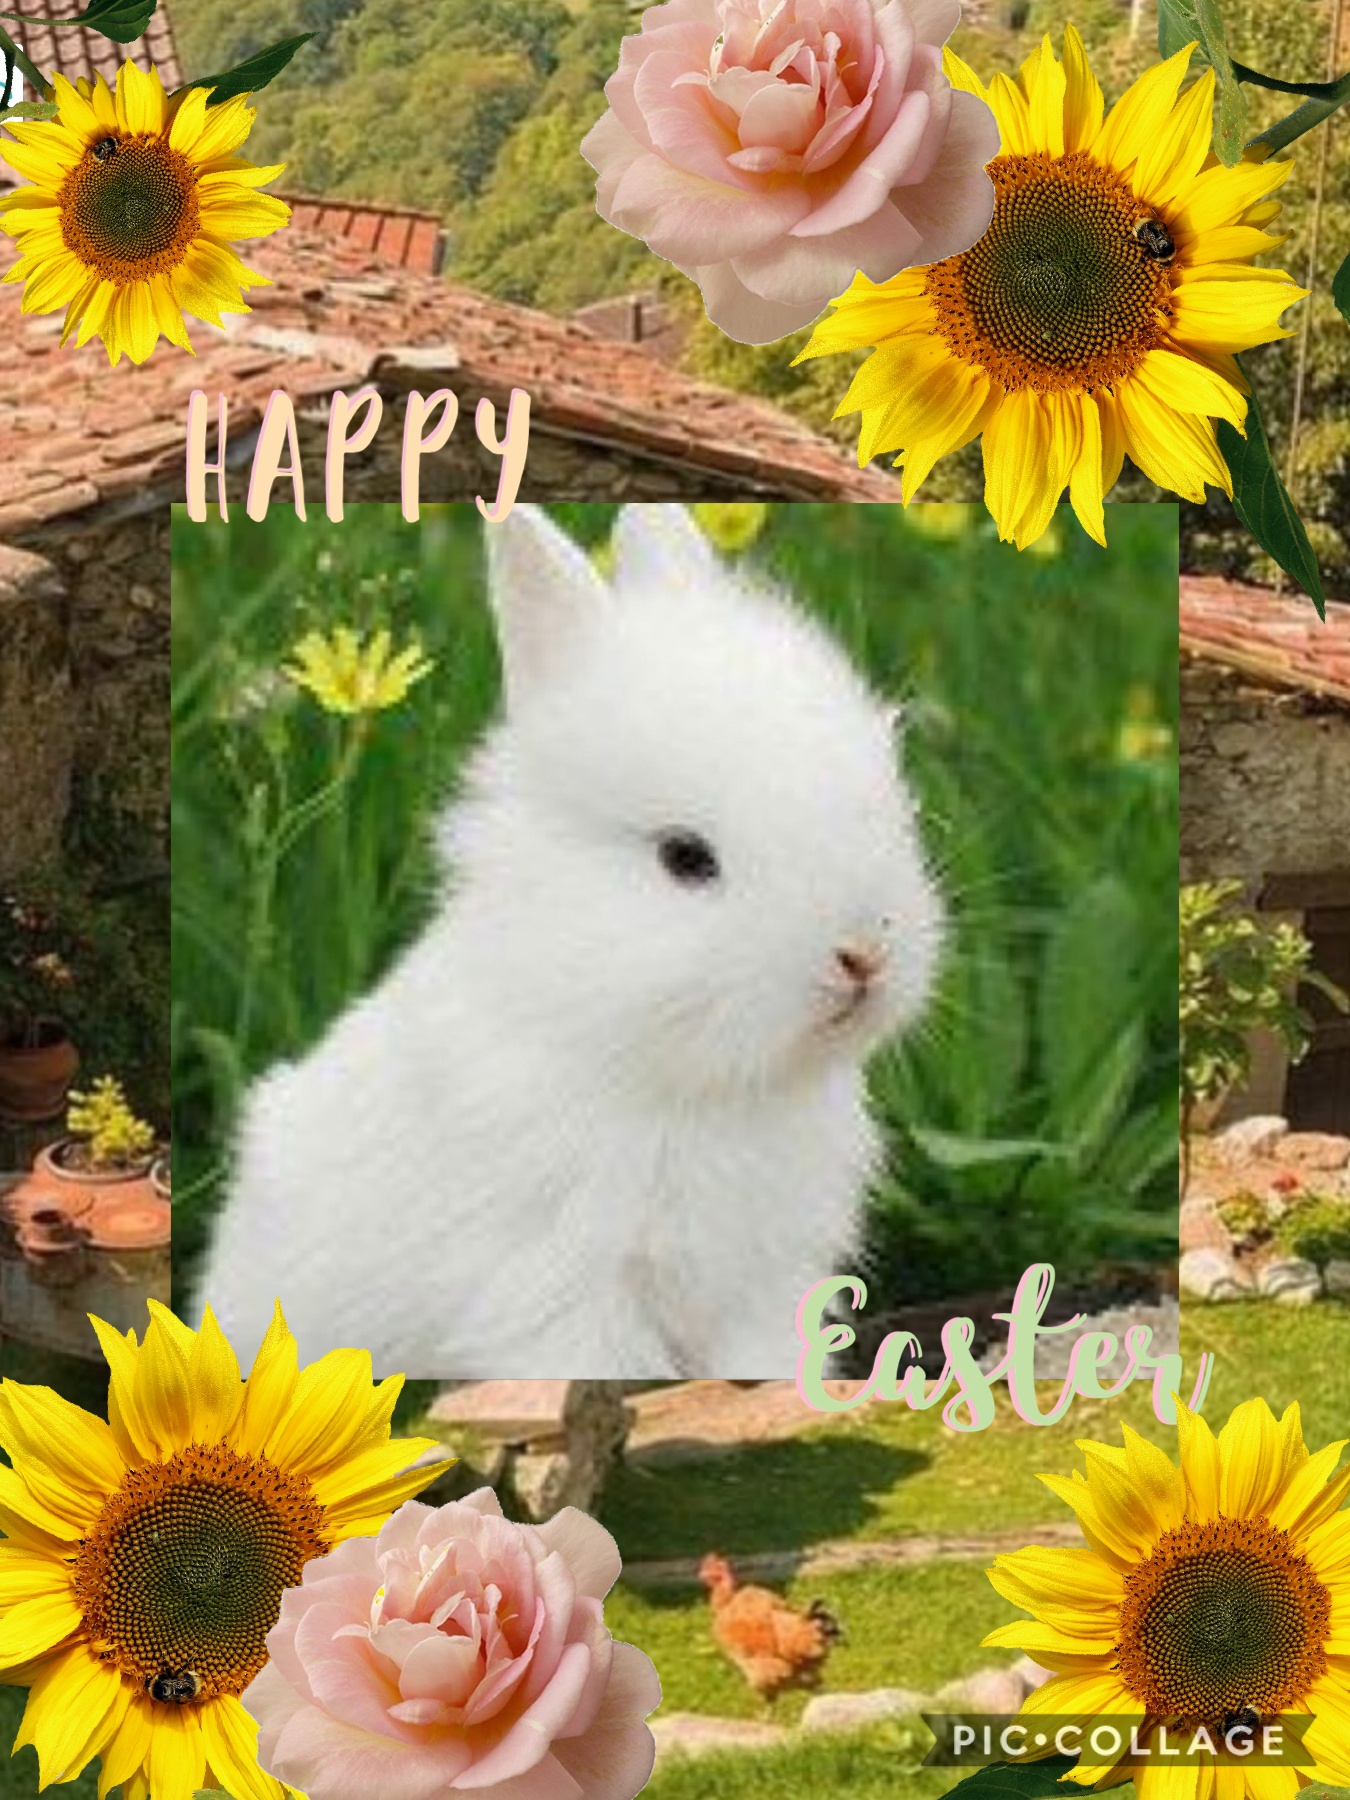 🐇Happy Easter!! Thanks for all the support! Especially @-Pretty_little_Thingz- and Sweet-Lavender! You guys are AMAZING!! I’m so grateful! 💕🐹